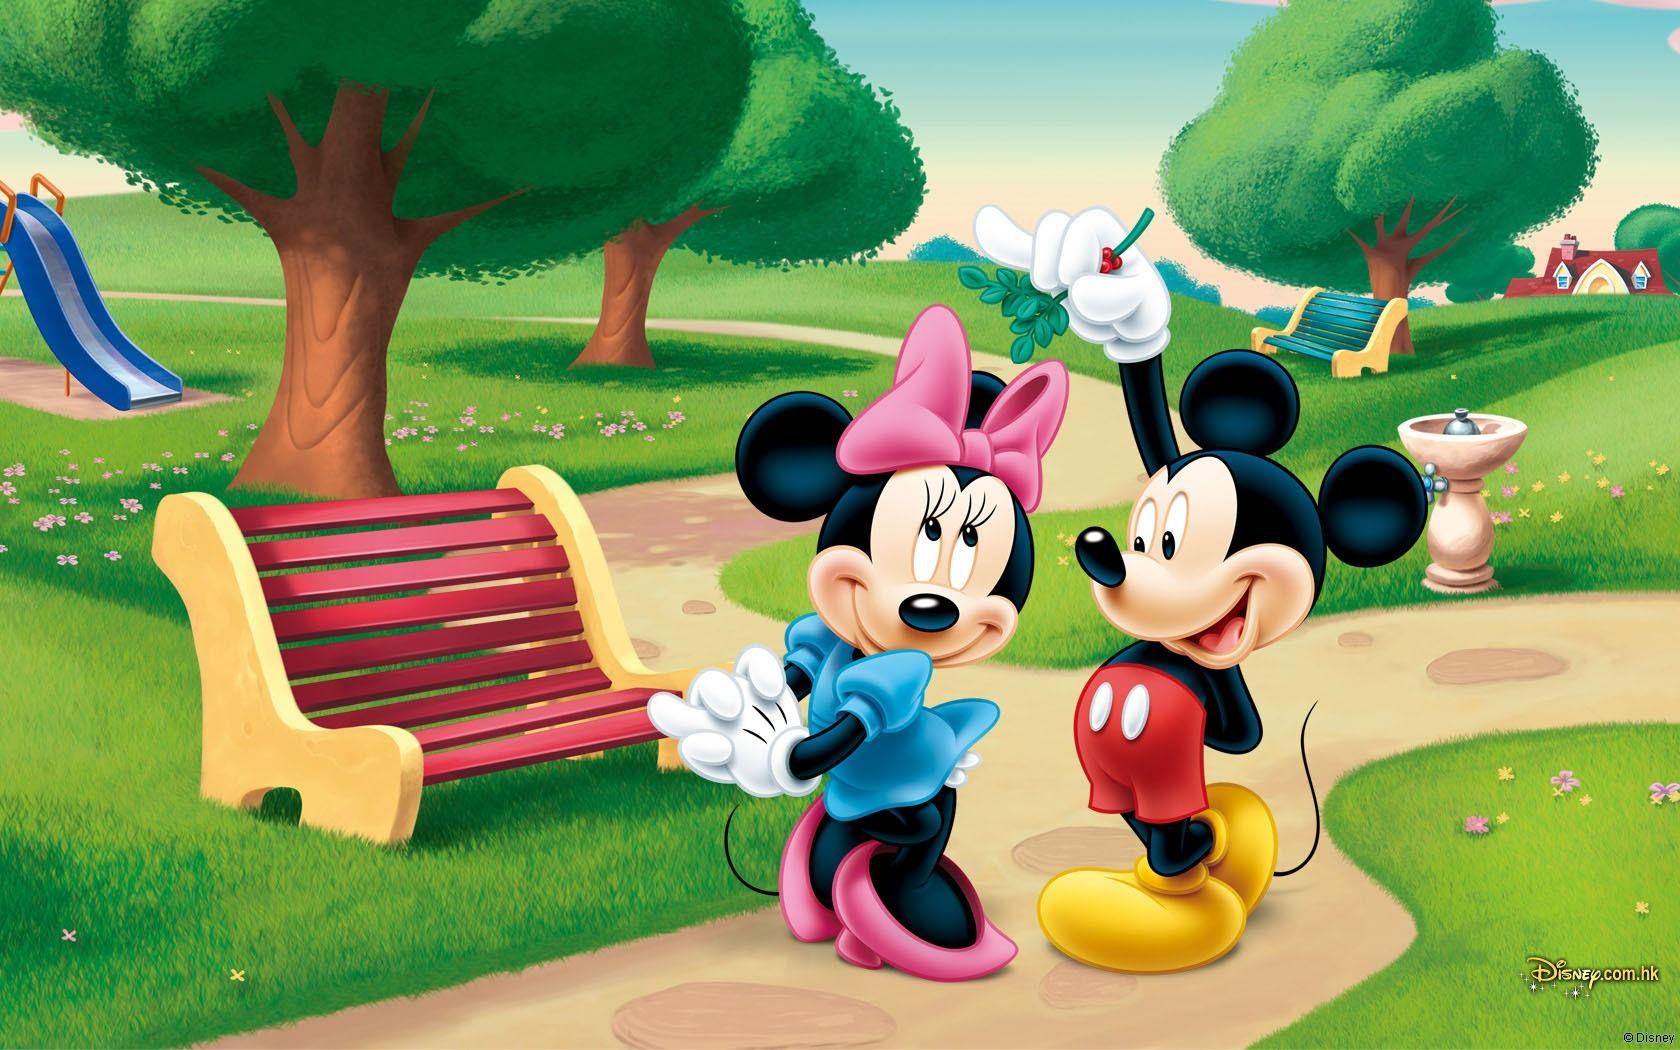 Mickey and Minnie Mouse Cartoon HD Wallpaper for iPad